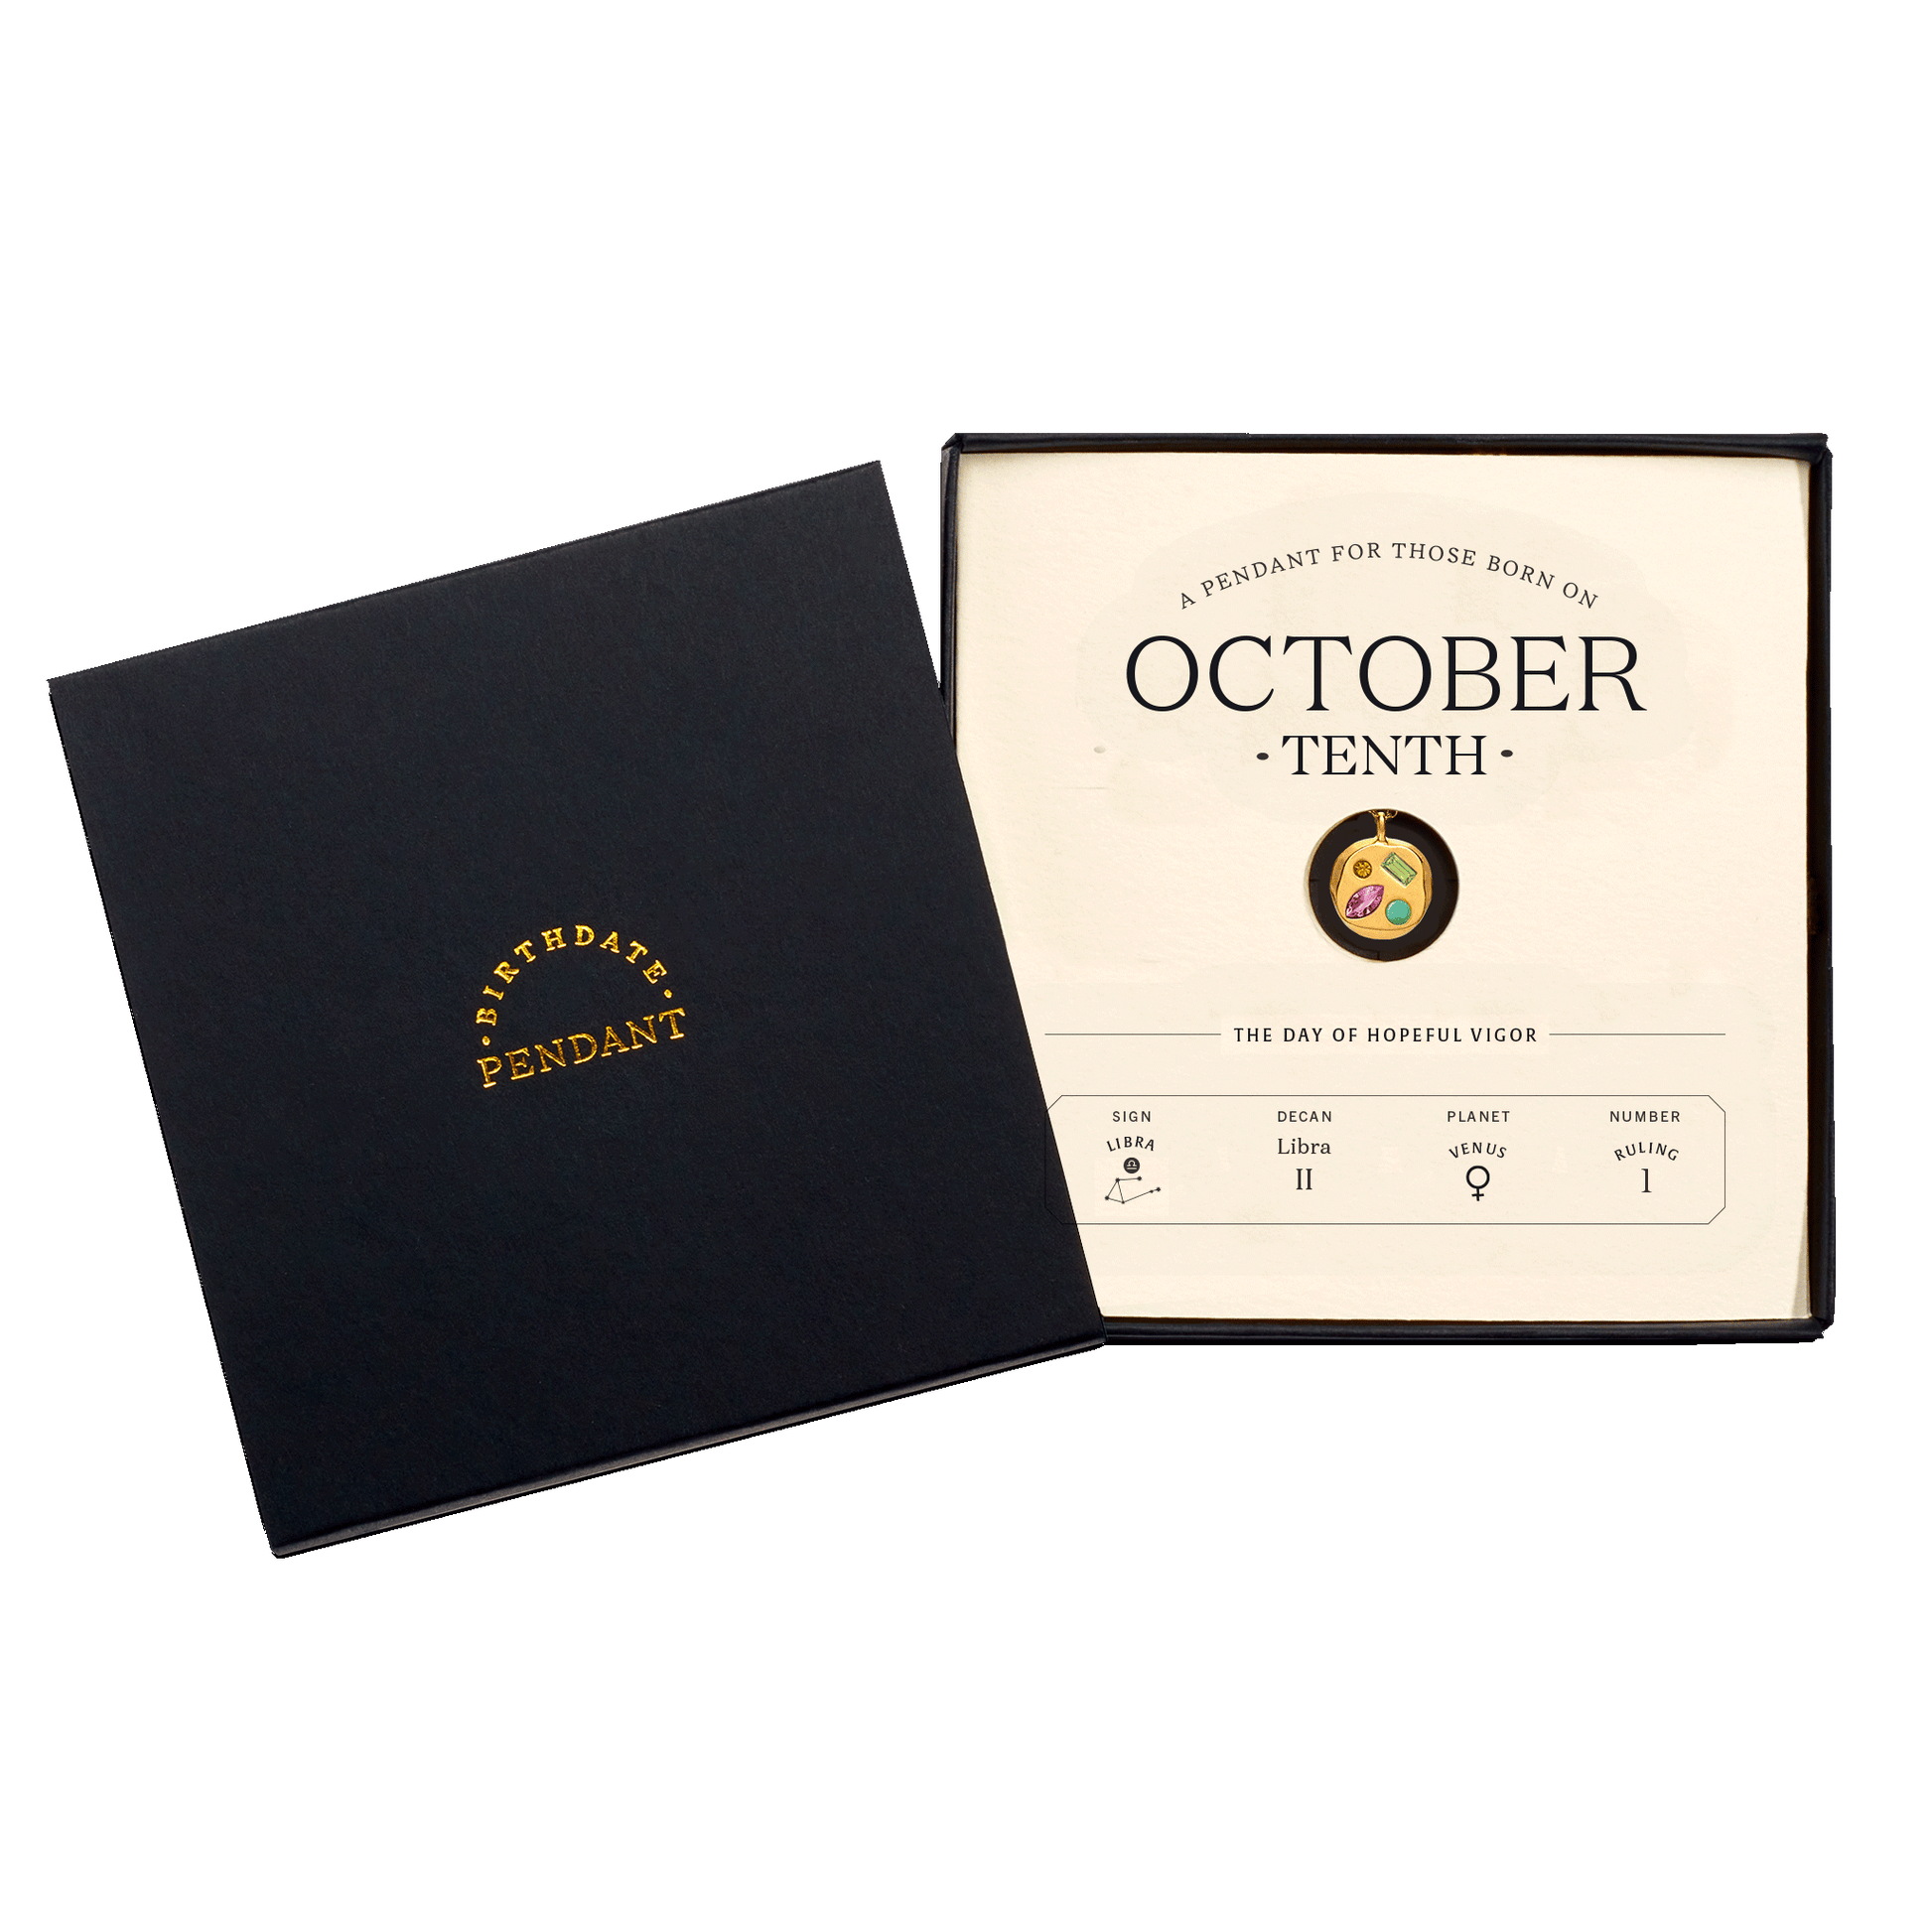 The October Tenth Pendant inside its box